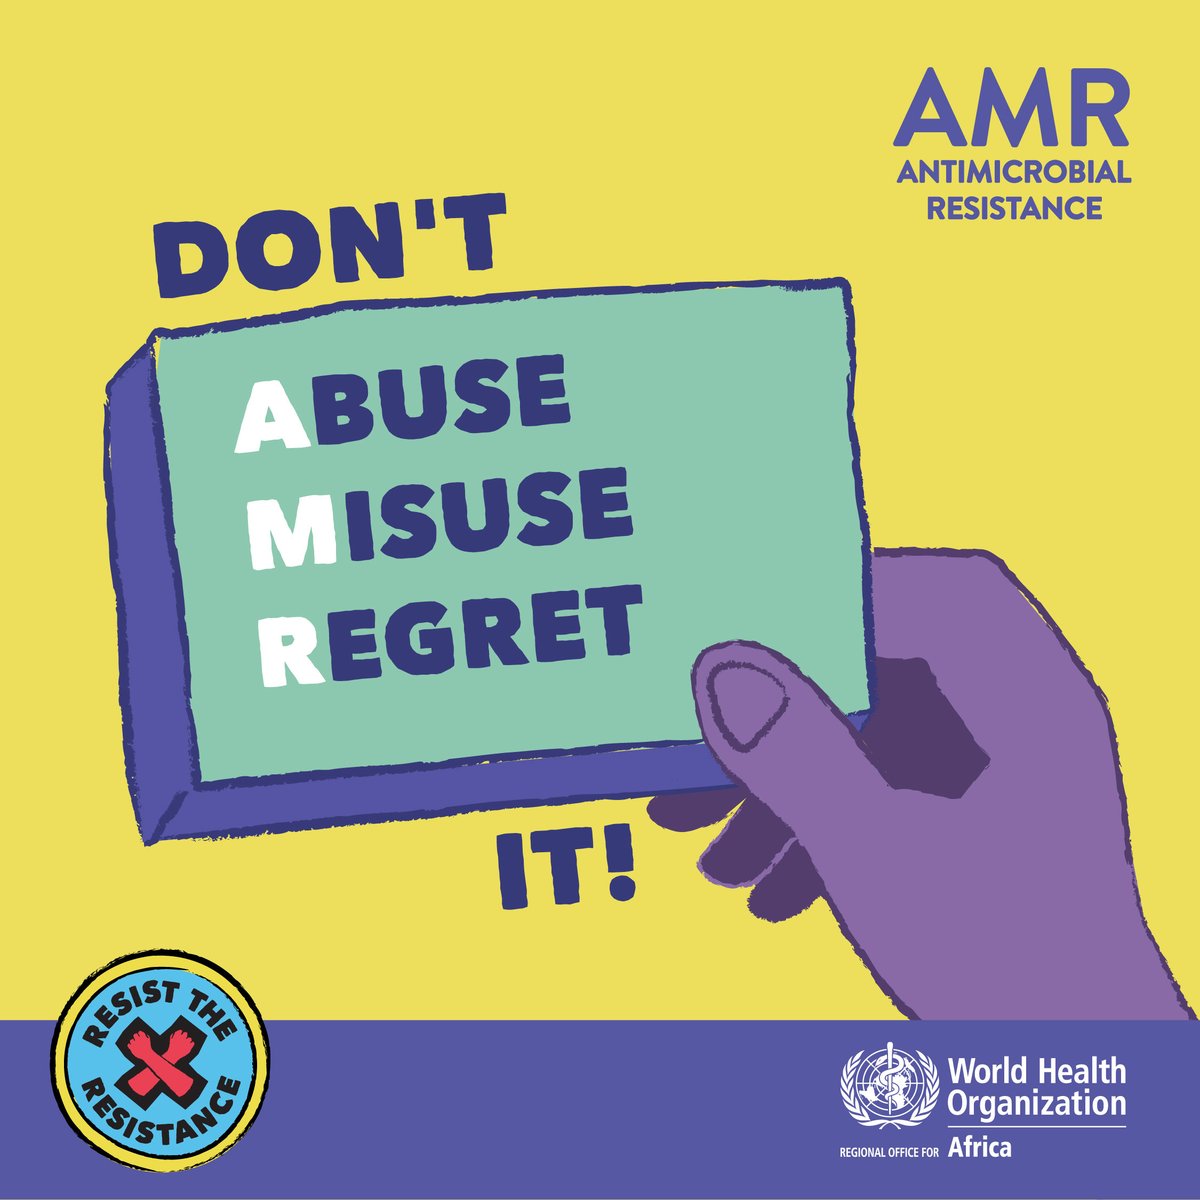 Say NO to self-medication and take antimicrobial medicines only when they're prescribed!  

Antimicrobial resistance, or AMR, occurs when bacteria, viruses, fungi and parasites mutate. and become resistant to medicines used to fight them.  
#ResistAMR